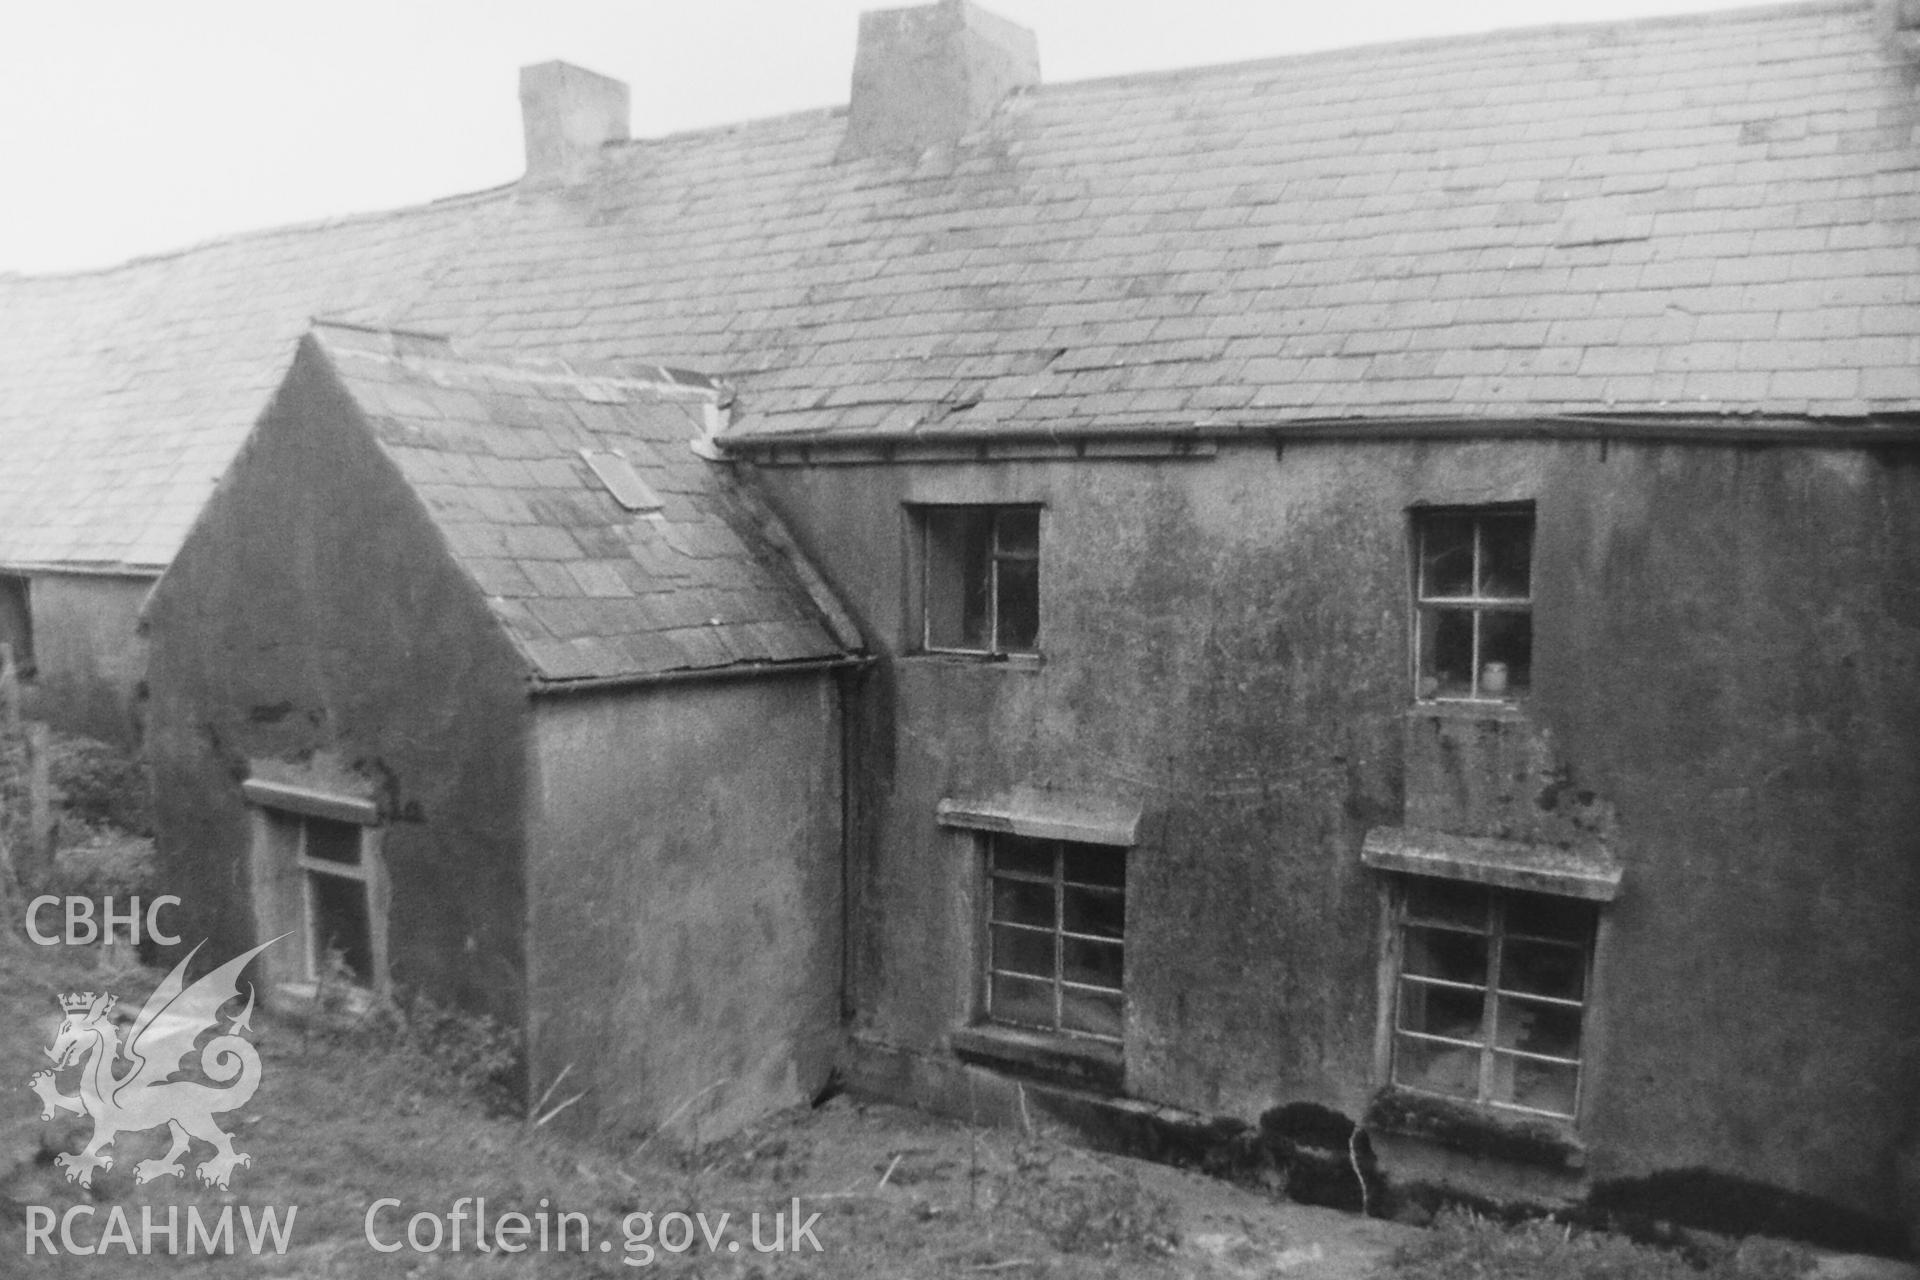 Black and white photo showing view of Llanilid Farm, taken by Paul R. Davis, undated.